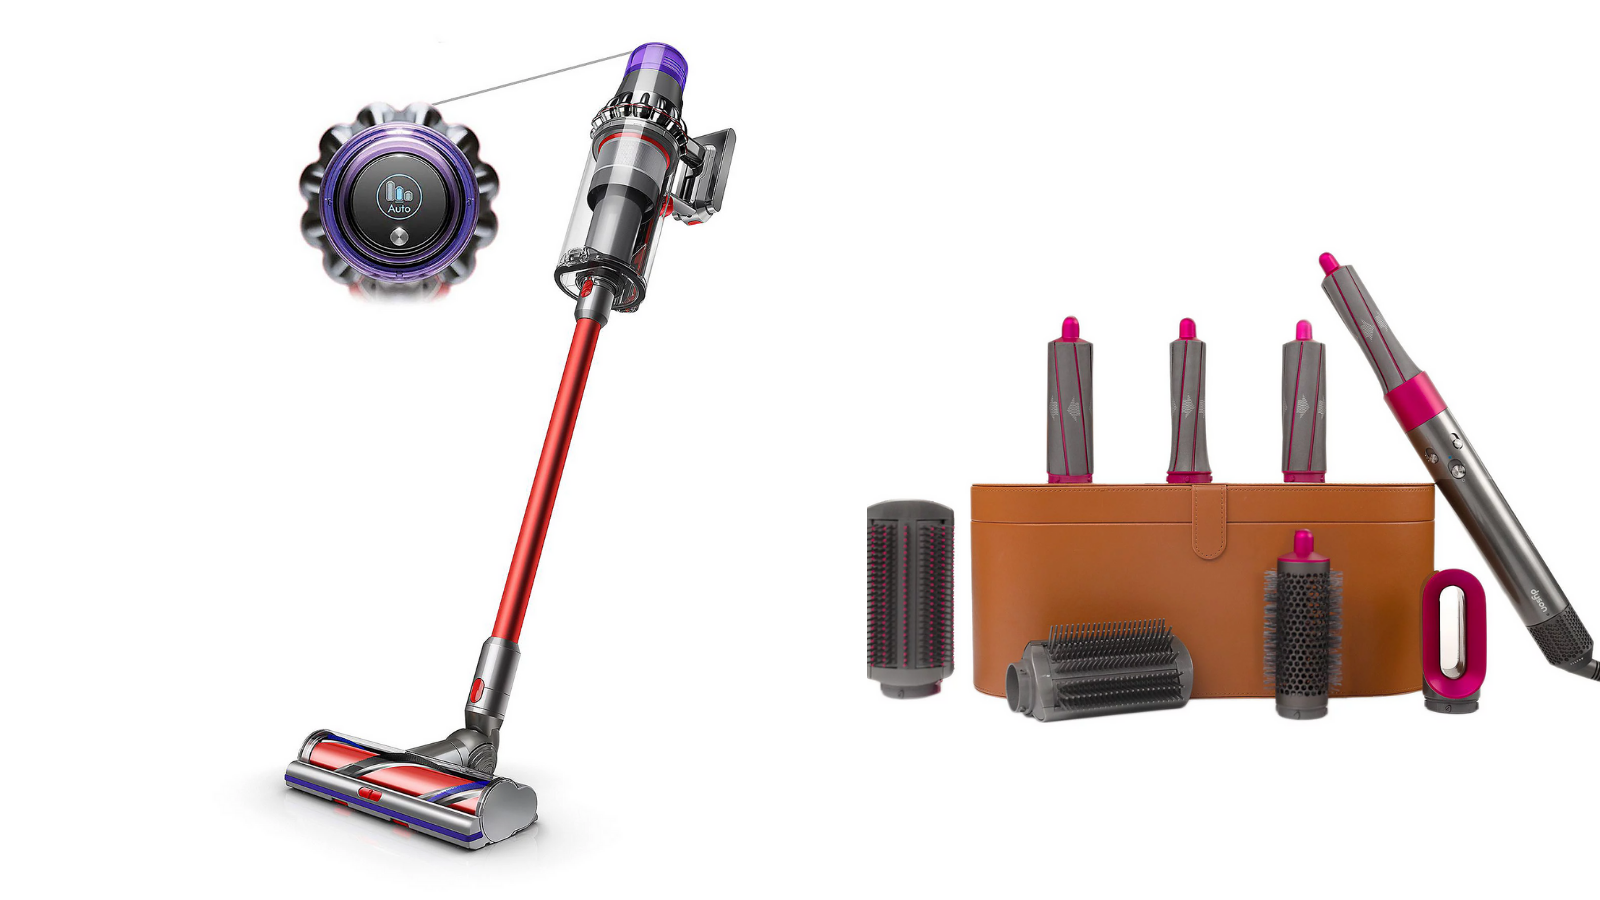 Dyson vacuum and curling wand on white background